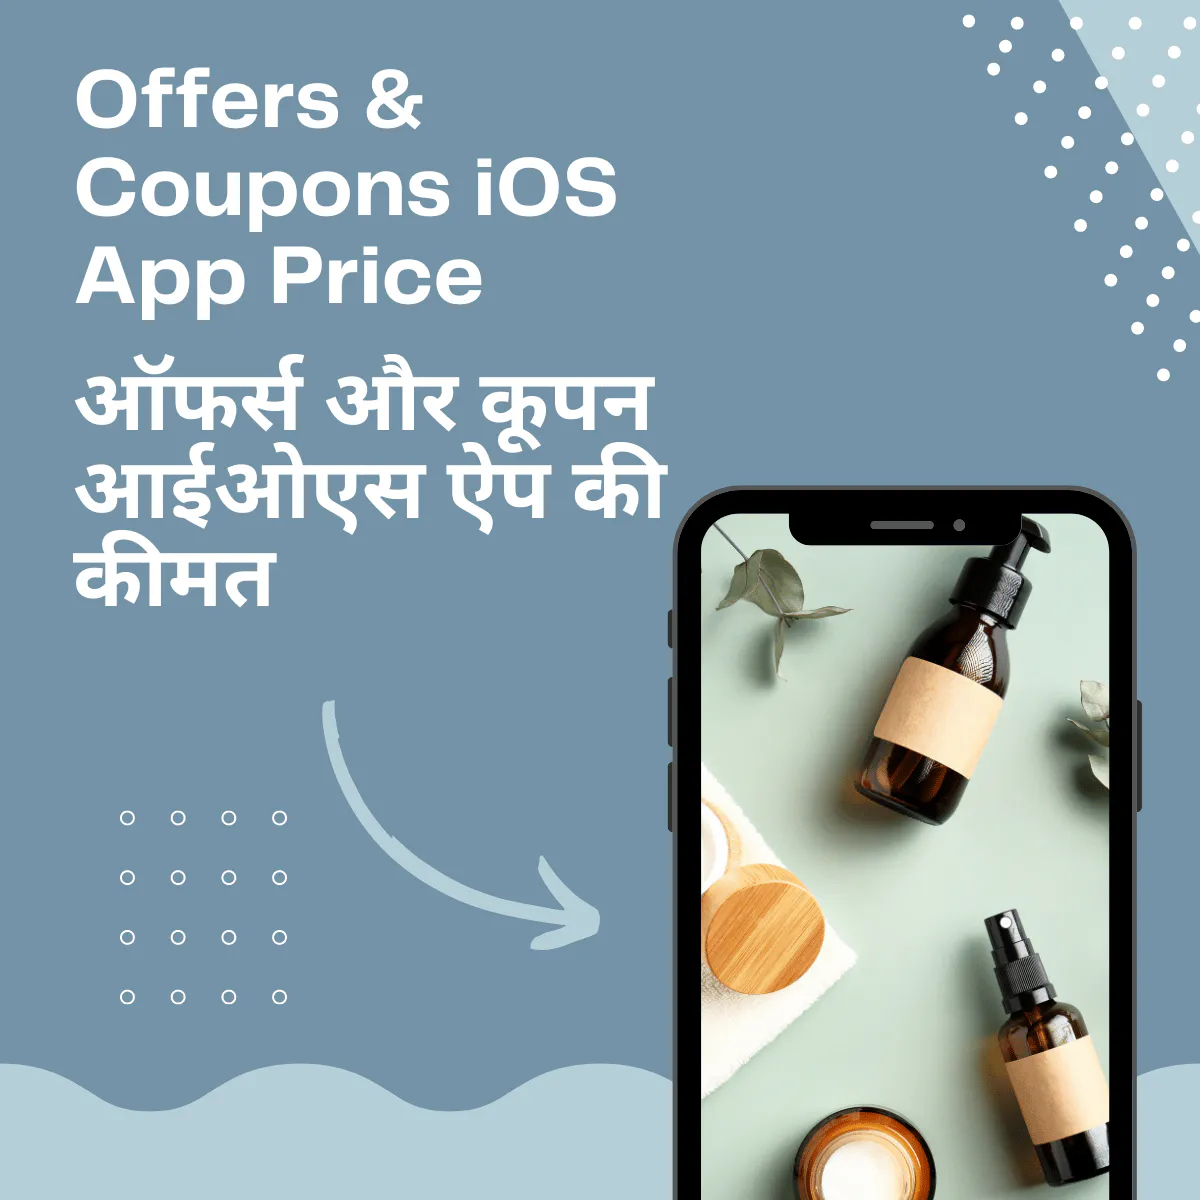 Offers & Coupons iOS App